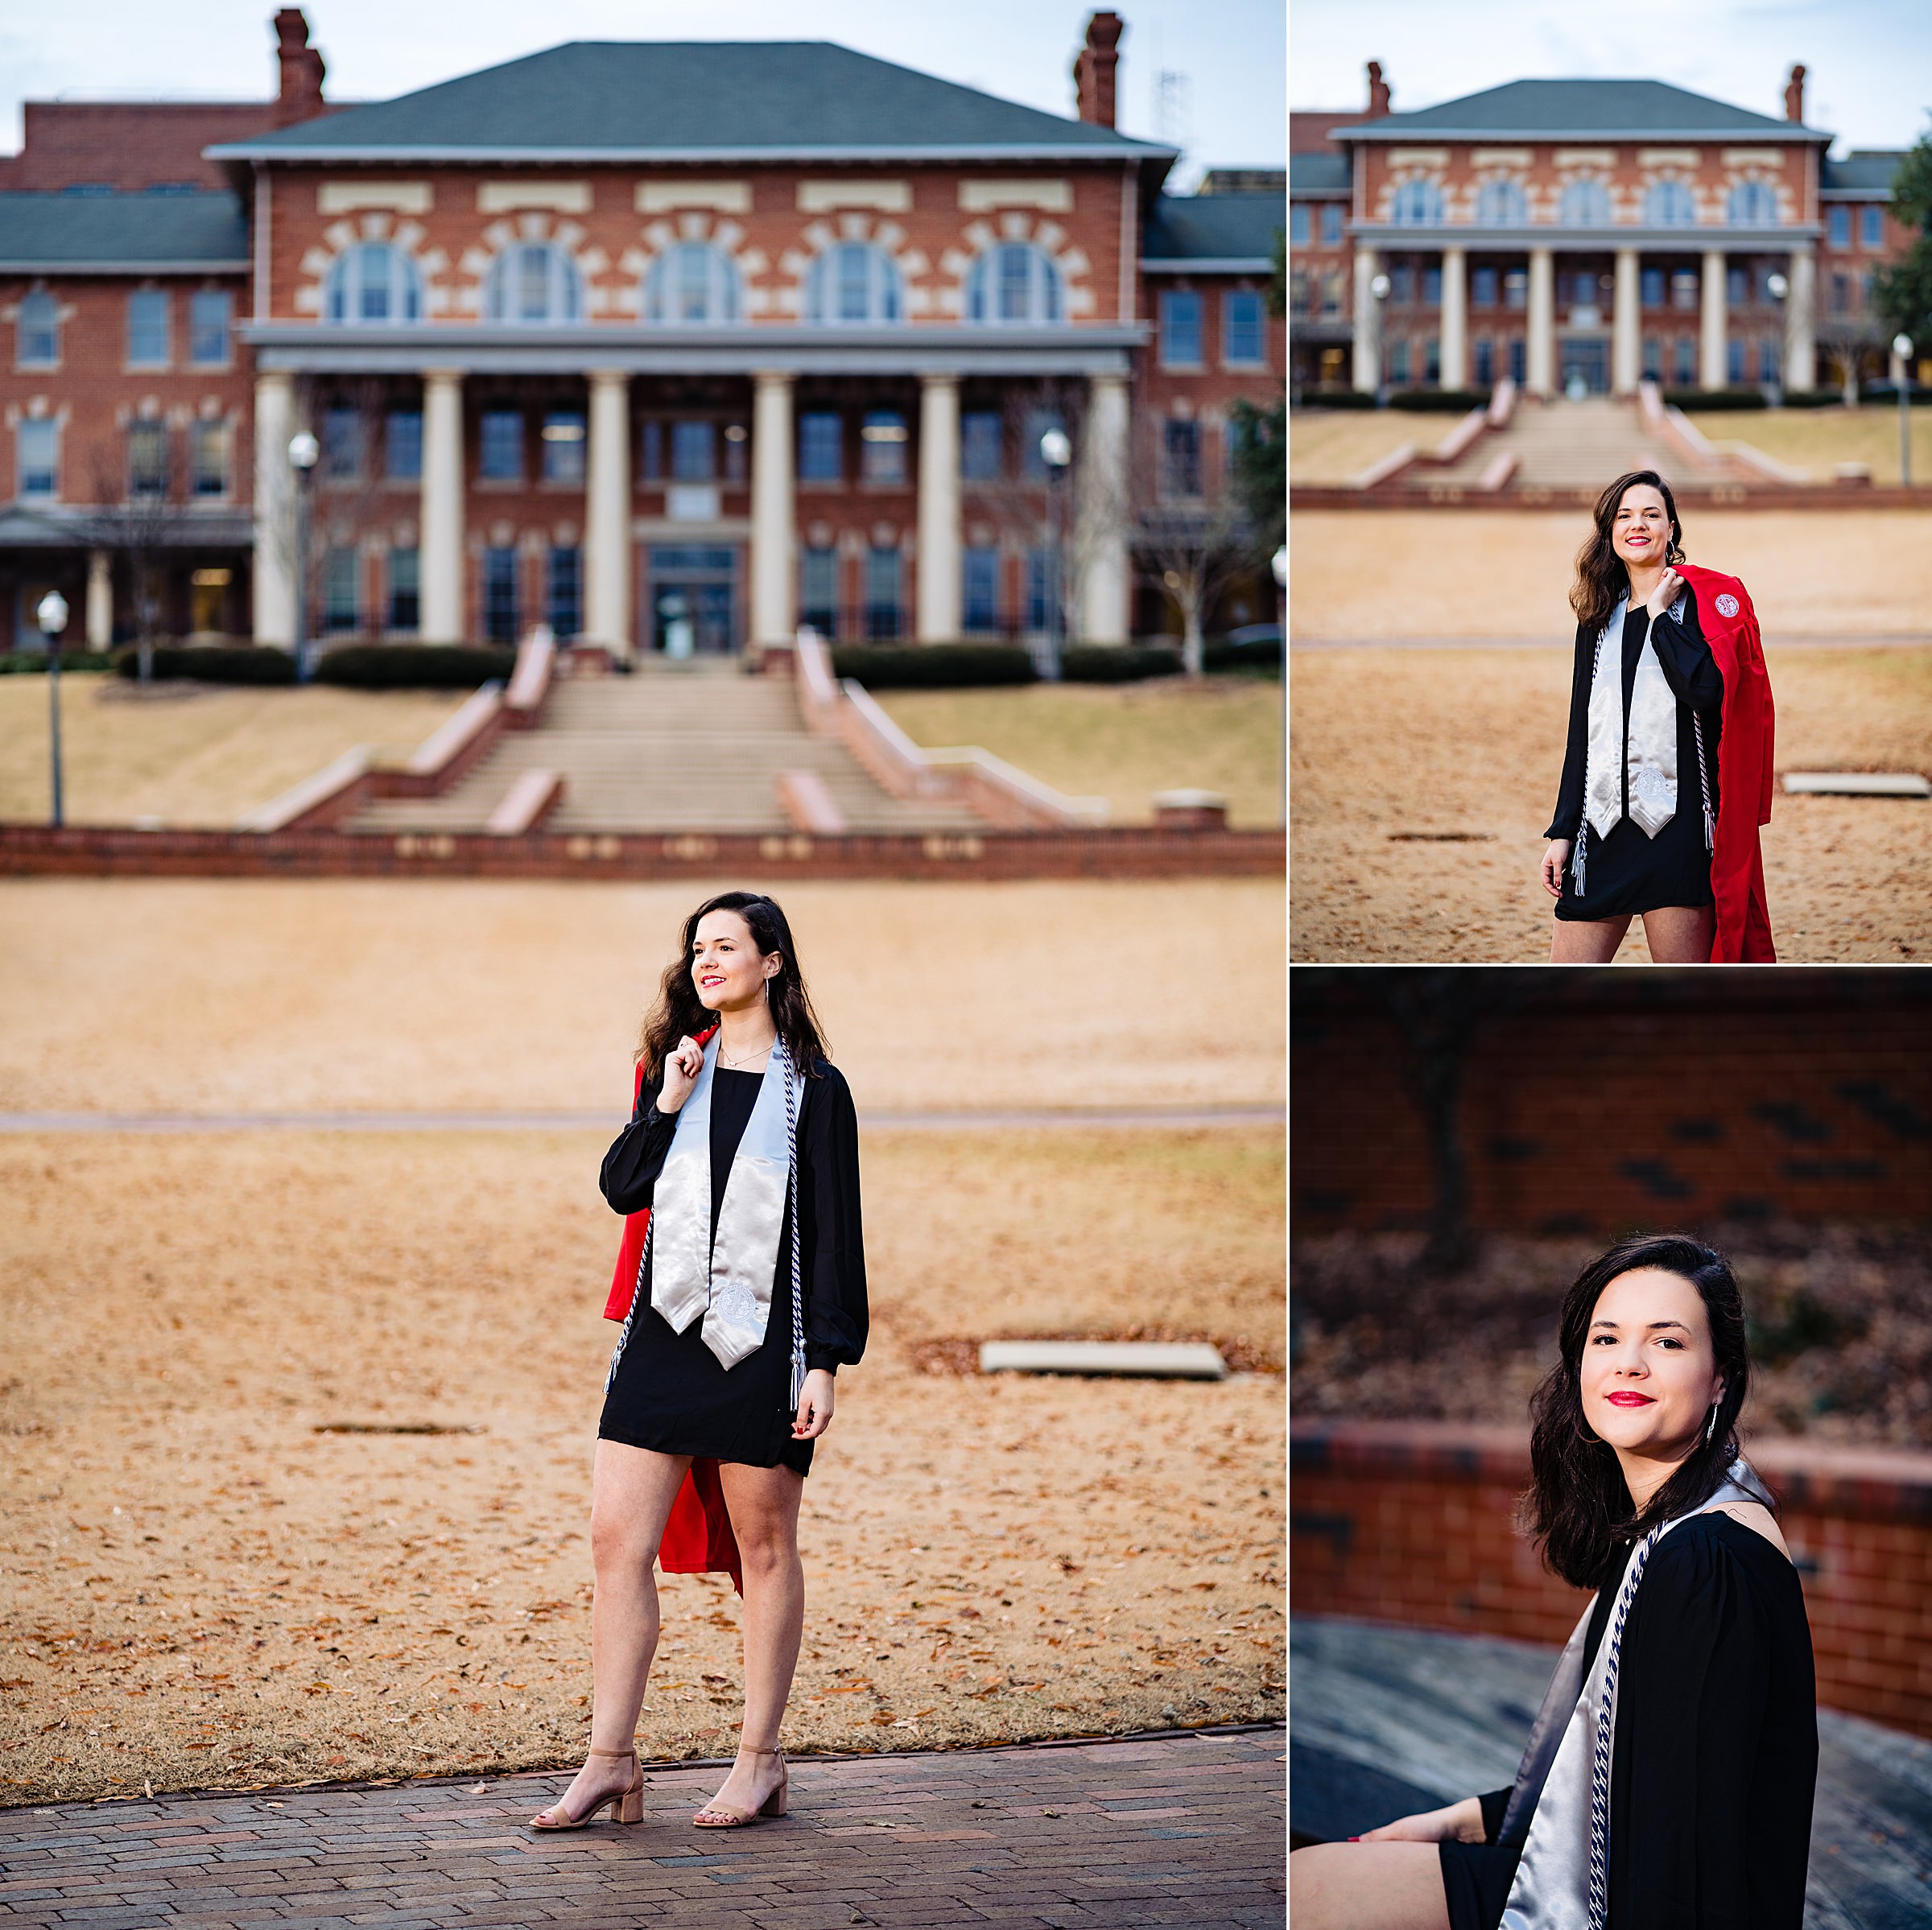 An NC State grad, class of 2019 poses for graduation portraits with her robe and stole in the center of the Court of Carolinas at NC State's Raleigh, North Carolina campus | kivusandcamera.com